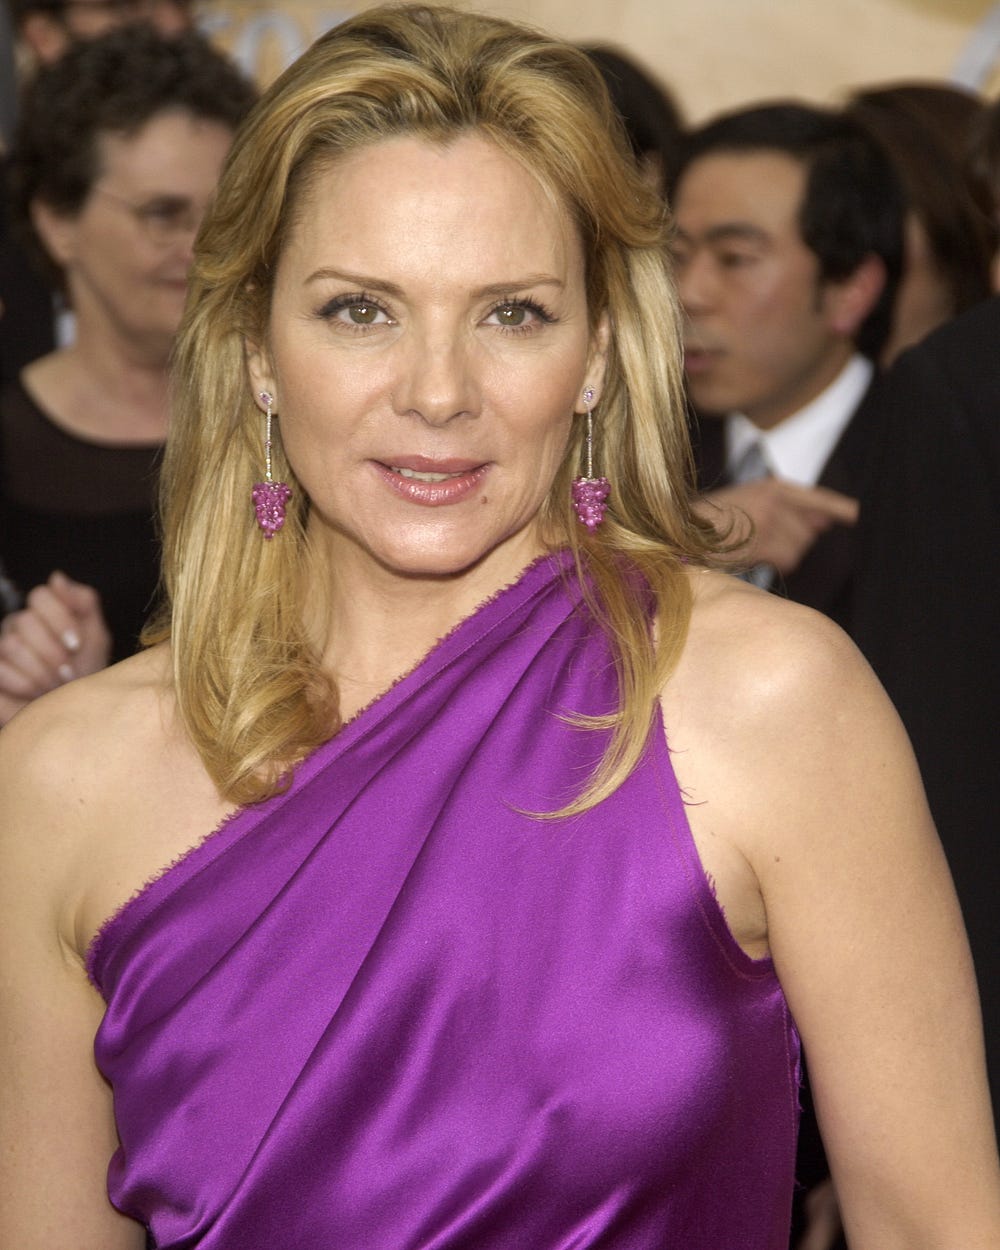 Kim Cattrall has spoken publicly about her battles with insomnia, which has affected her ability to work.